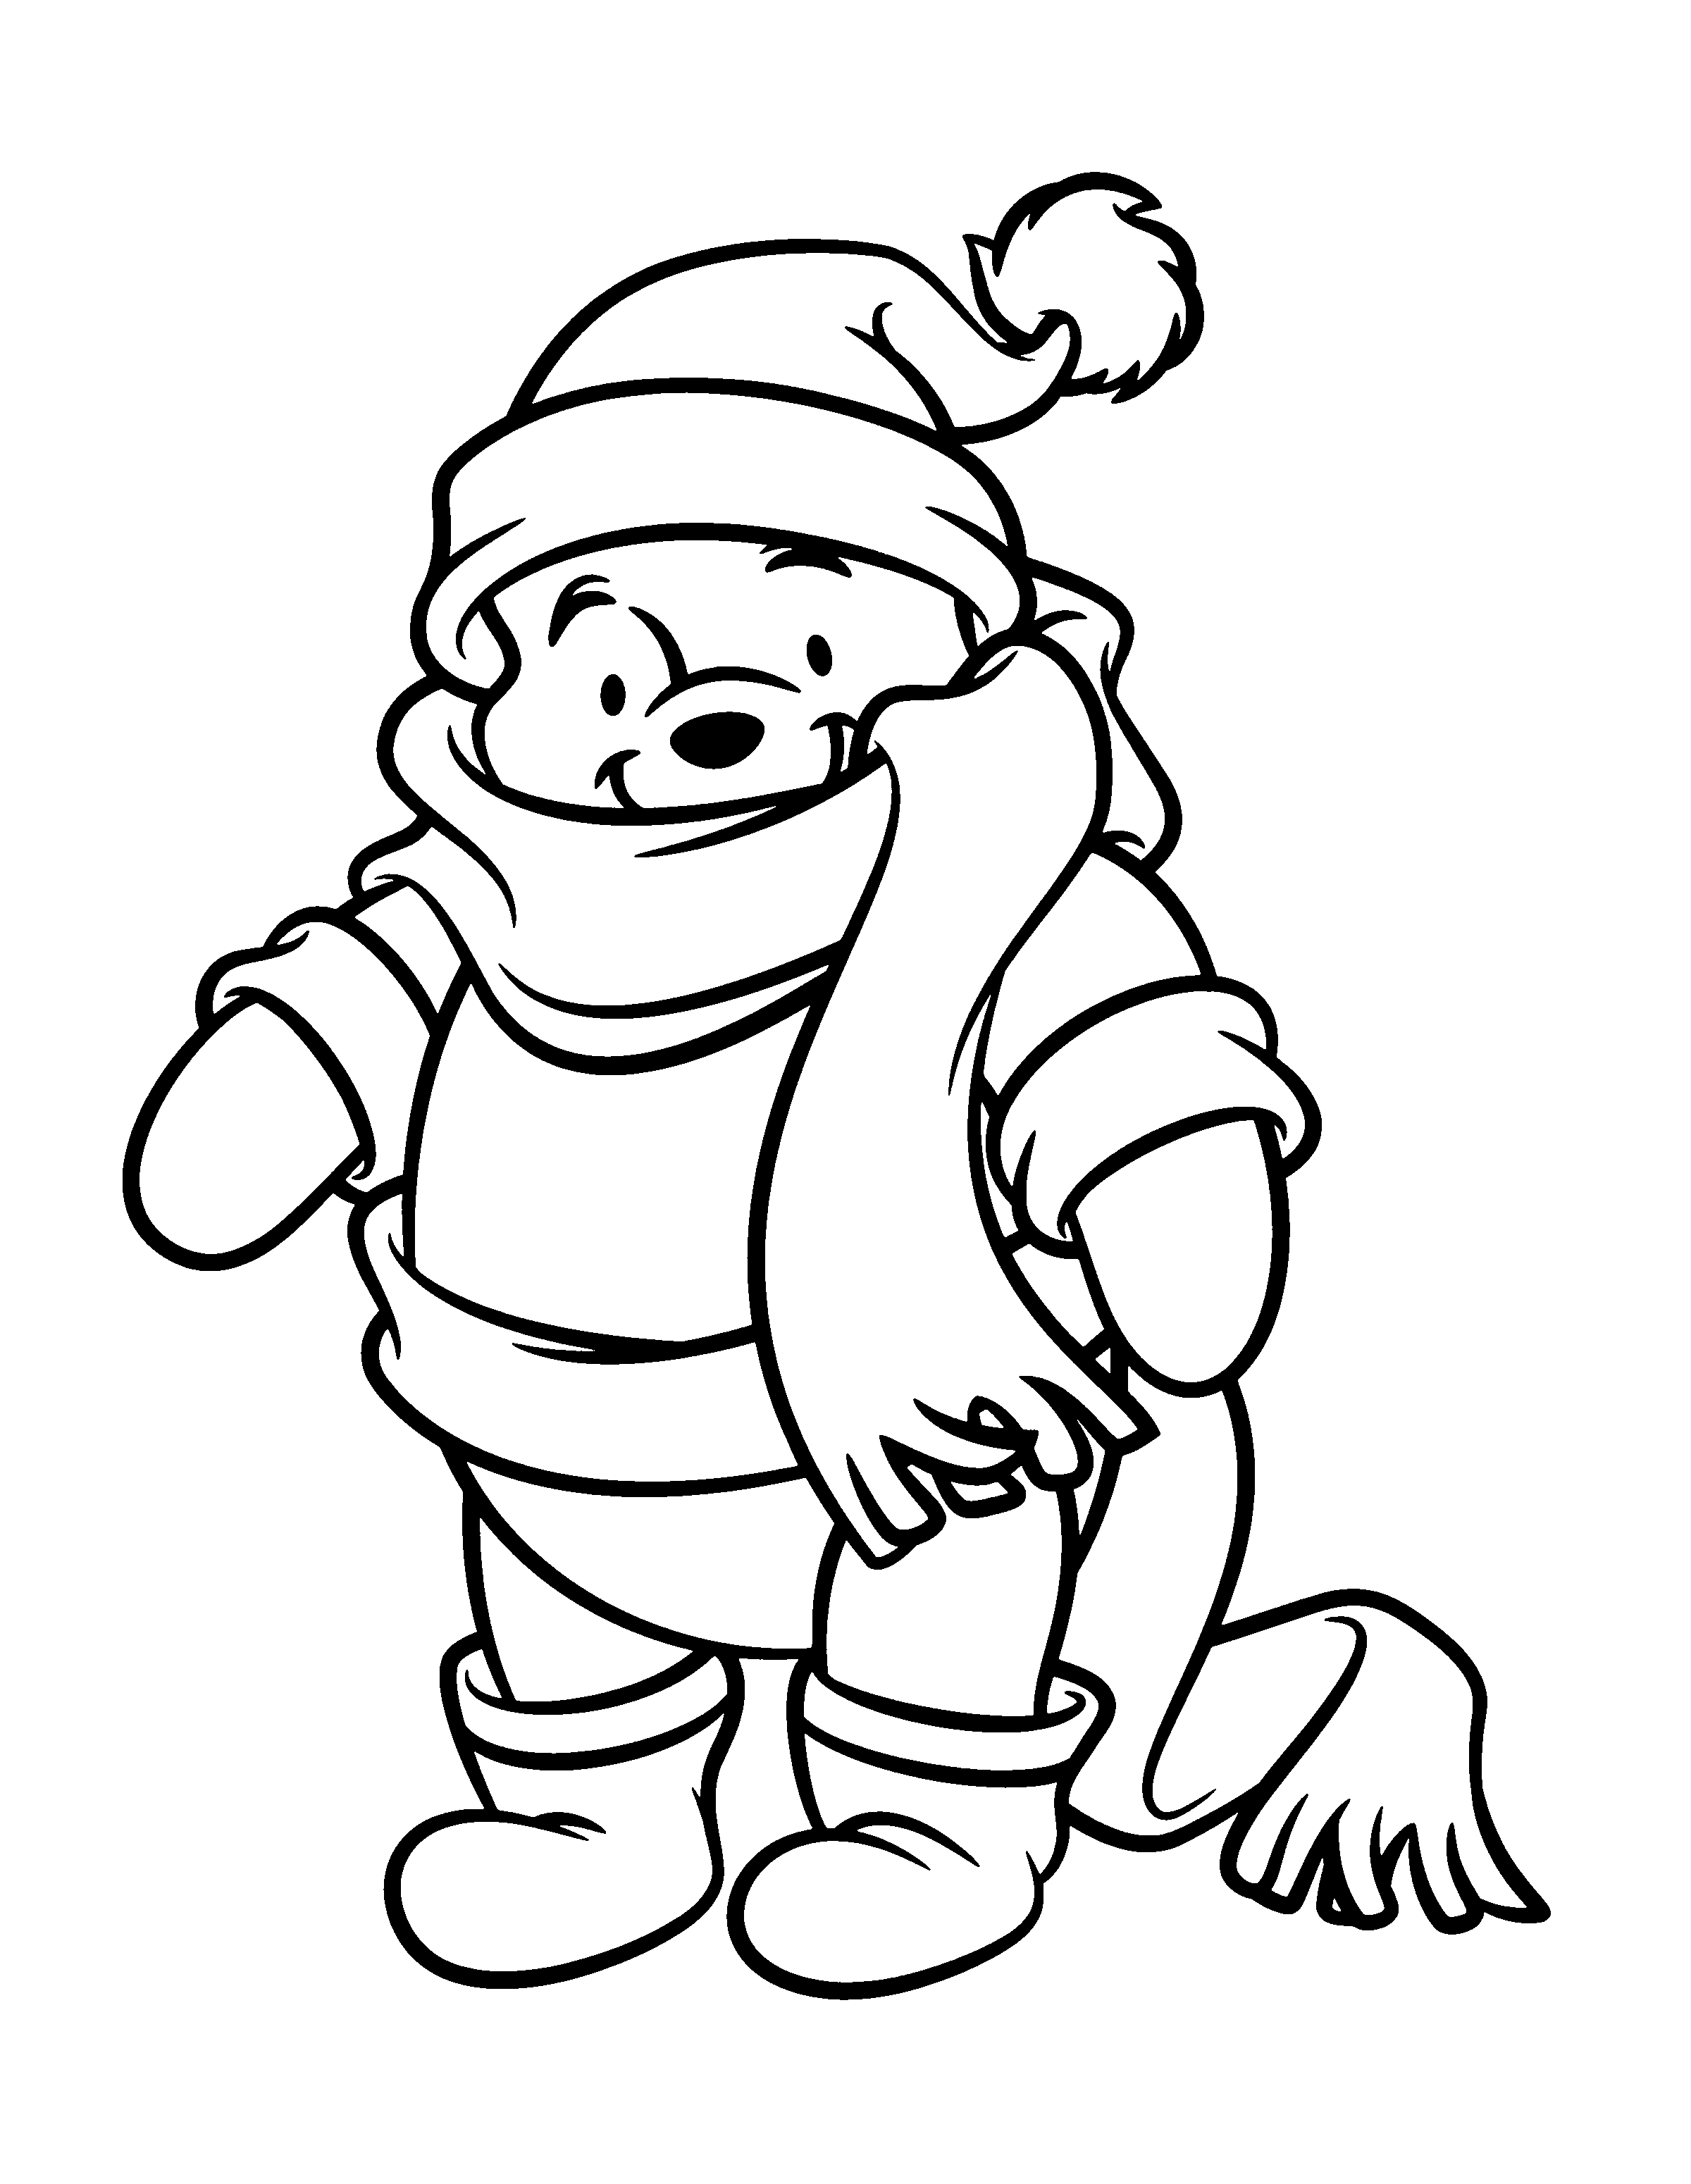 Christmas Coloring Pages Winnie The Pooh